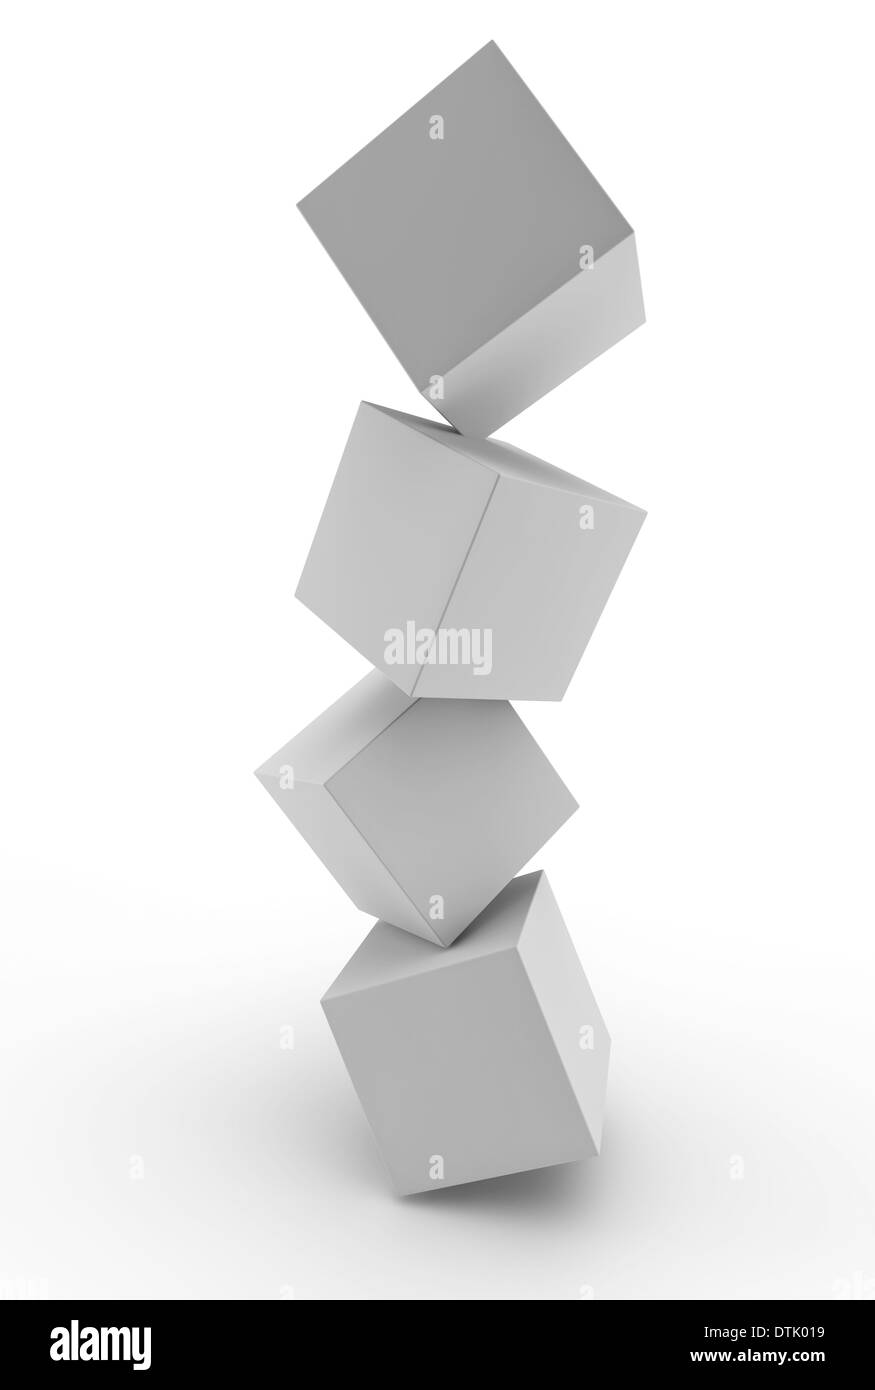 3d illustration to represent support, balance and teamwork Stock Photo